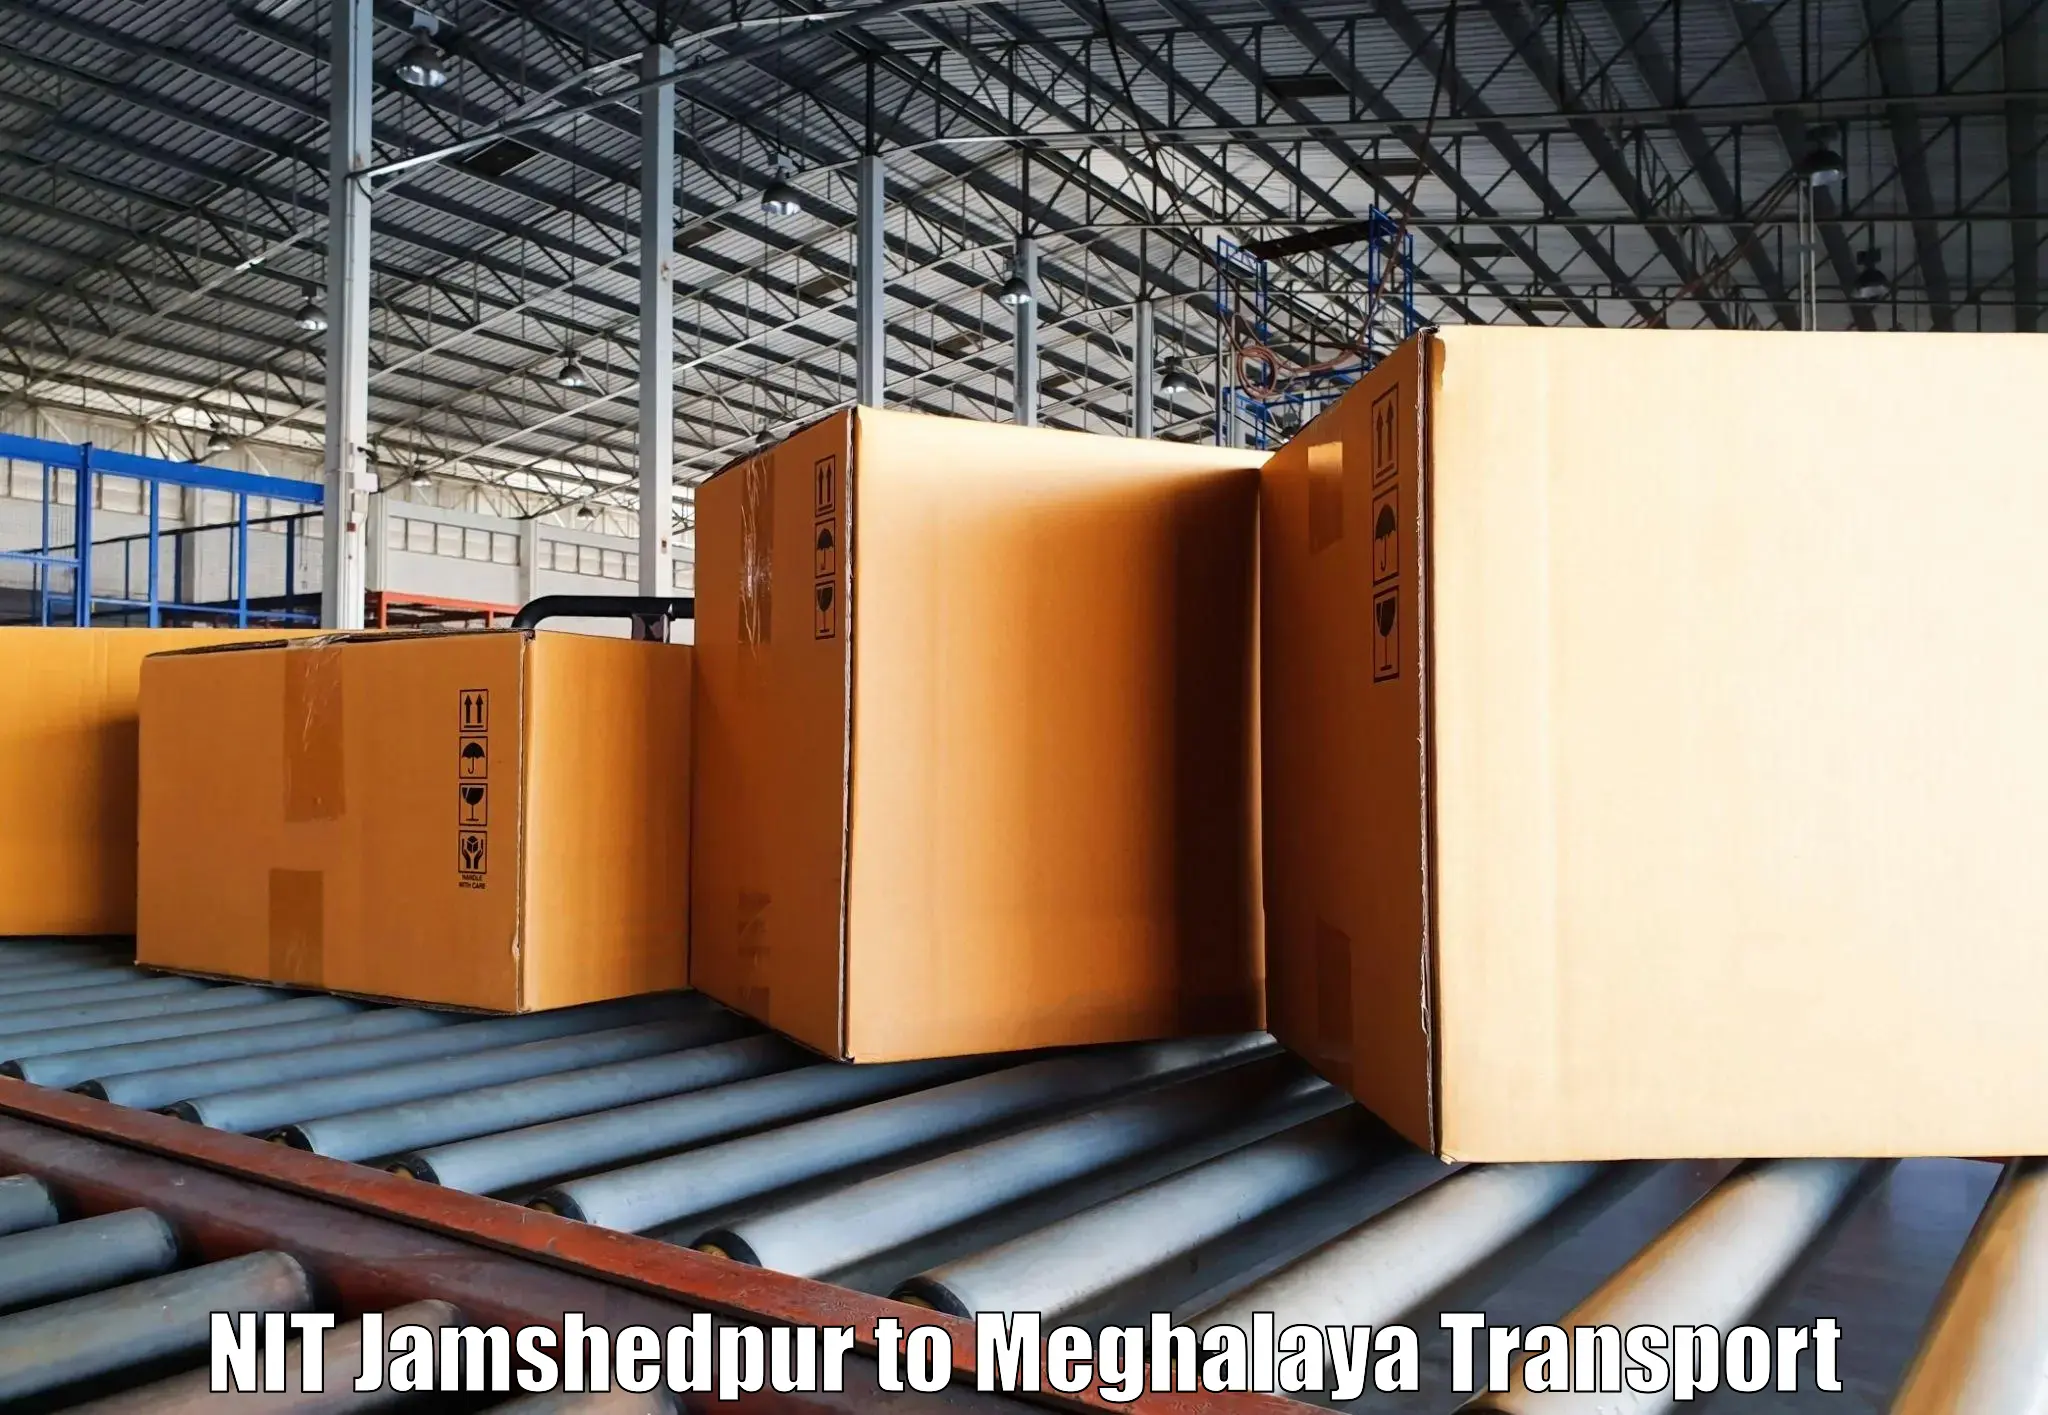 Container transport service NIT Jamshedpur to Tura